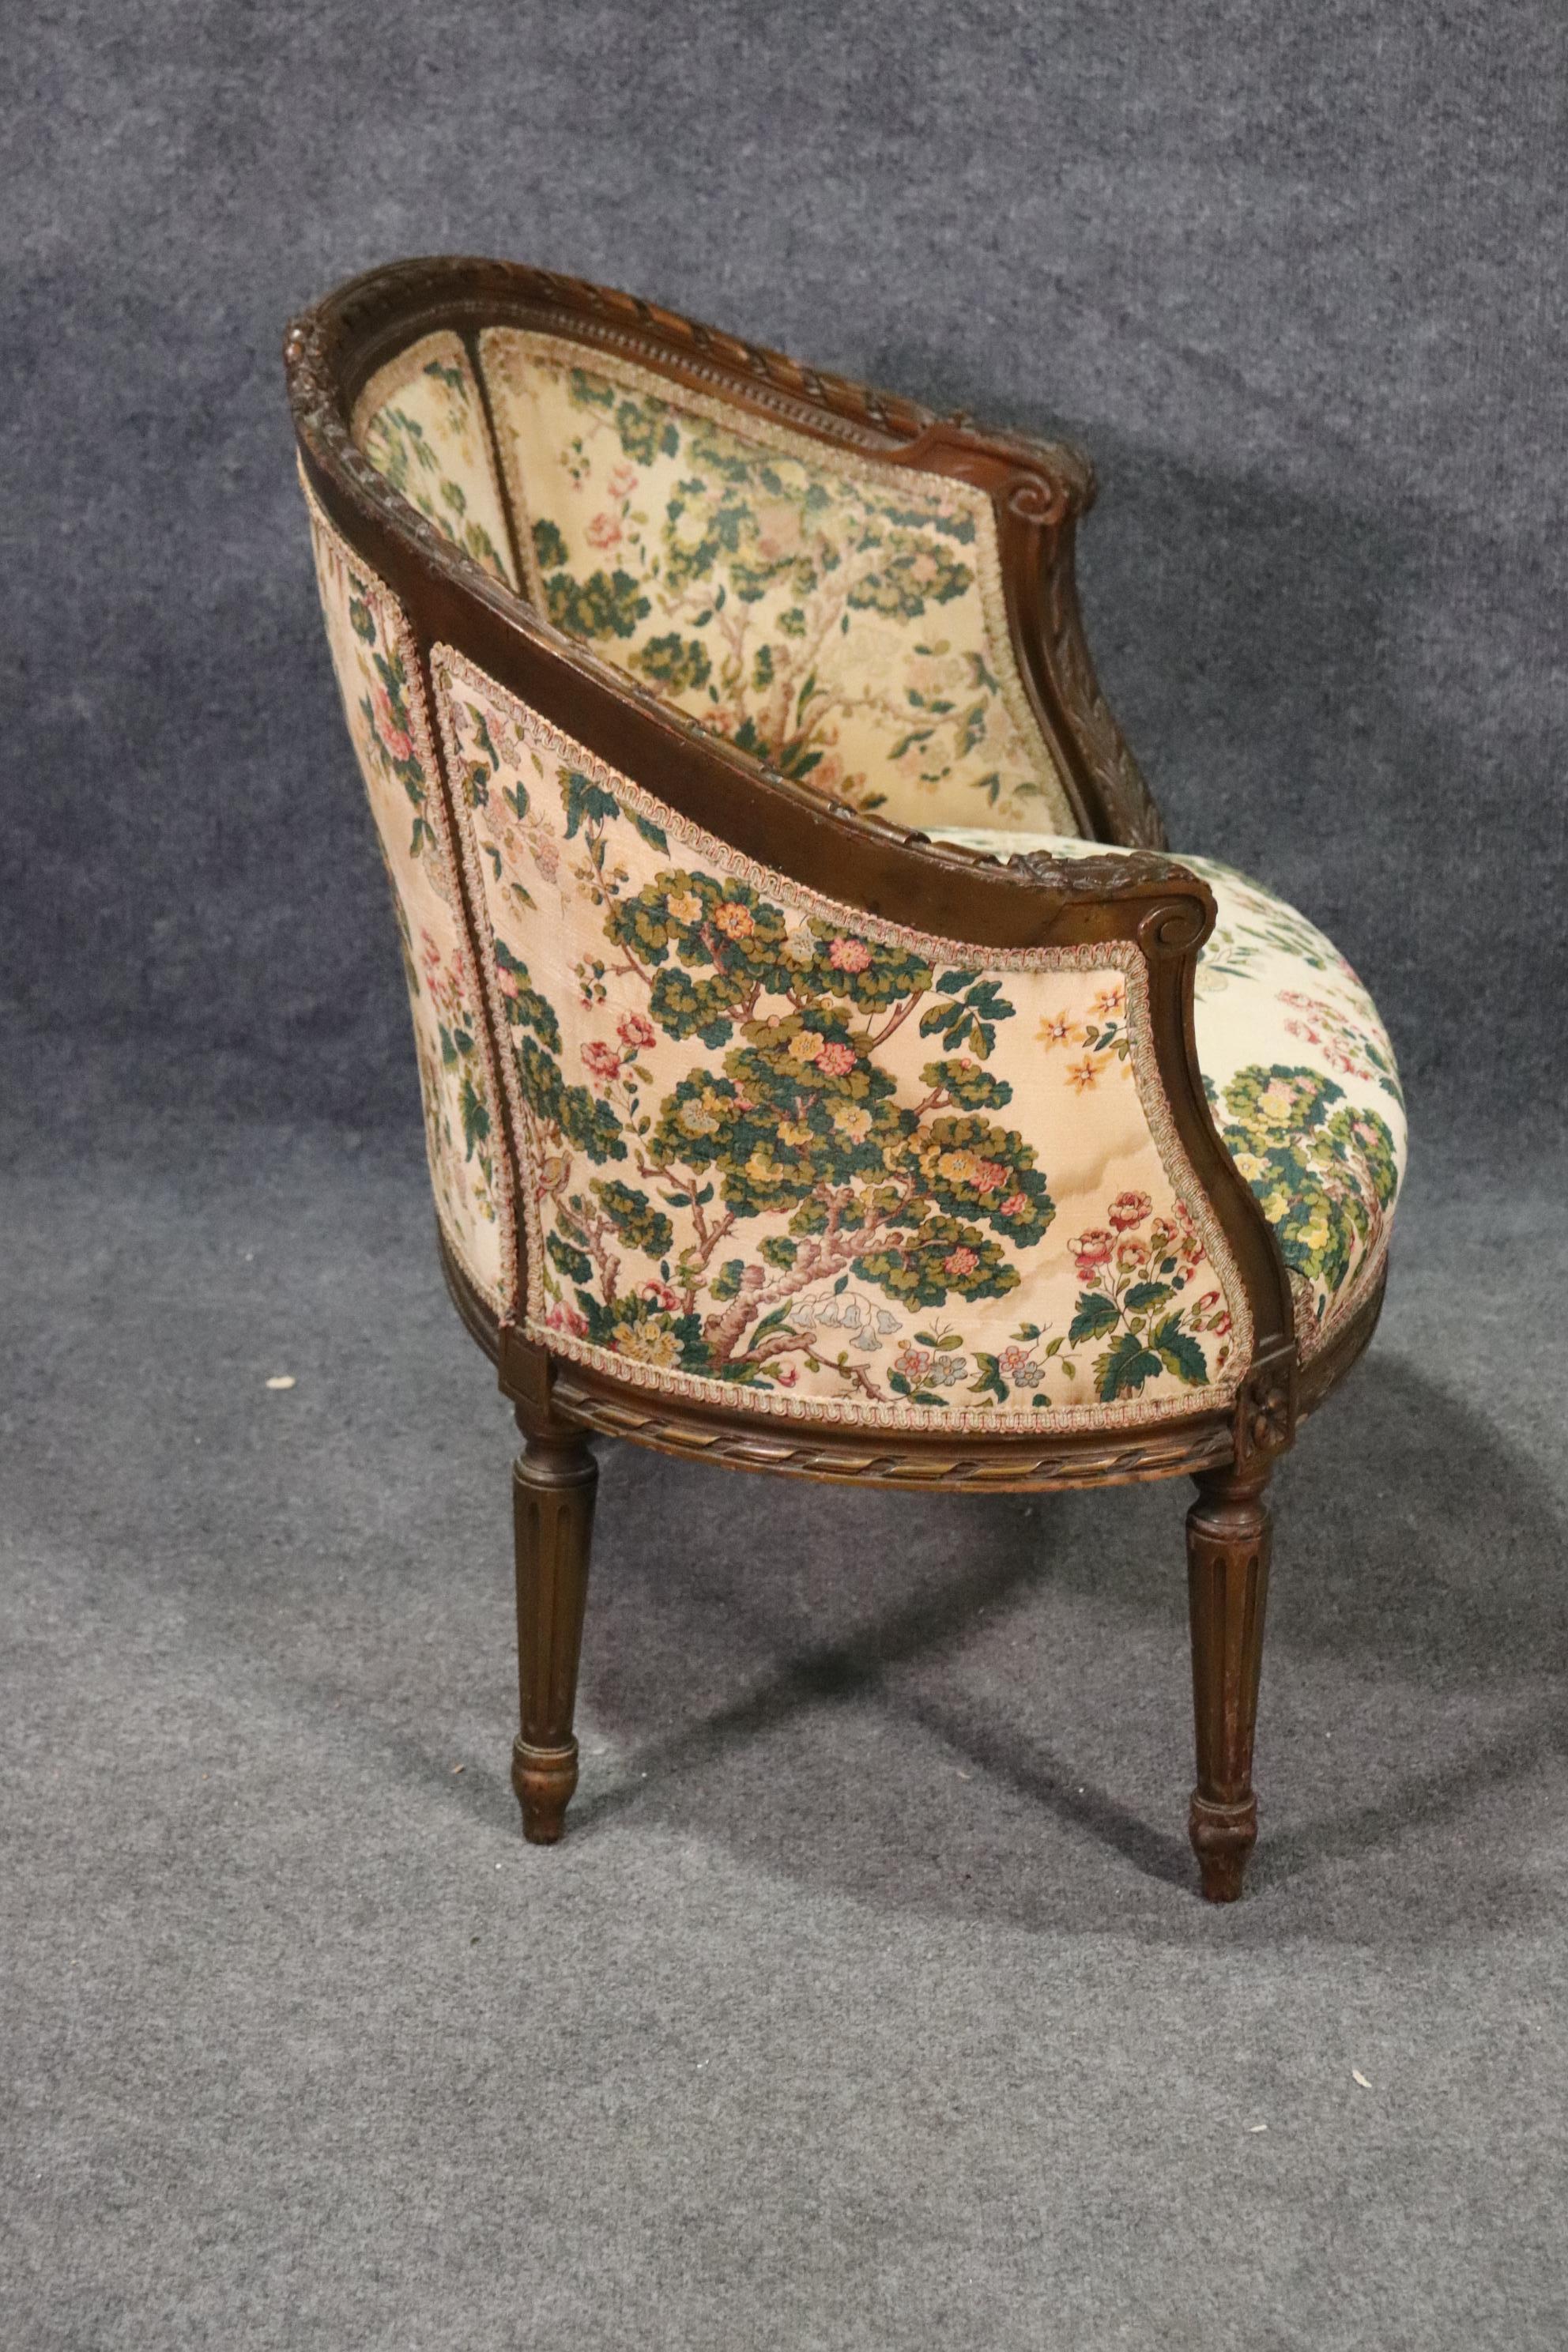 This is a gorgeous small carved Louis XVI chair. The chair can be used in a bedroom or as a vanity chair or just for use as an occasional chair. The chair measures: 31 tall x 32 wide x 24 deep and the seat height is 16.5 inches.